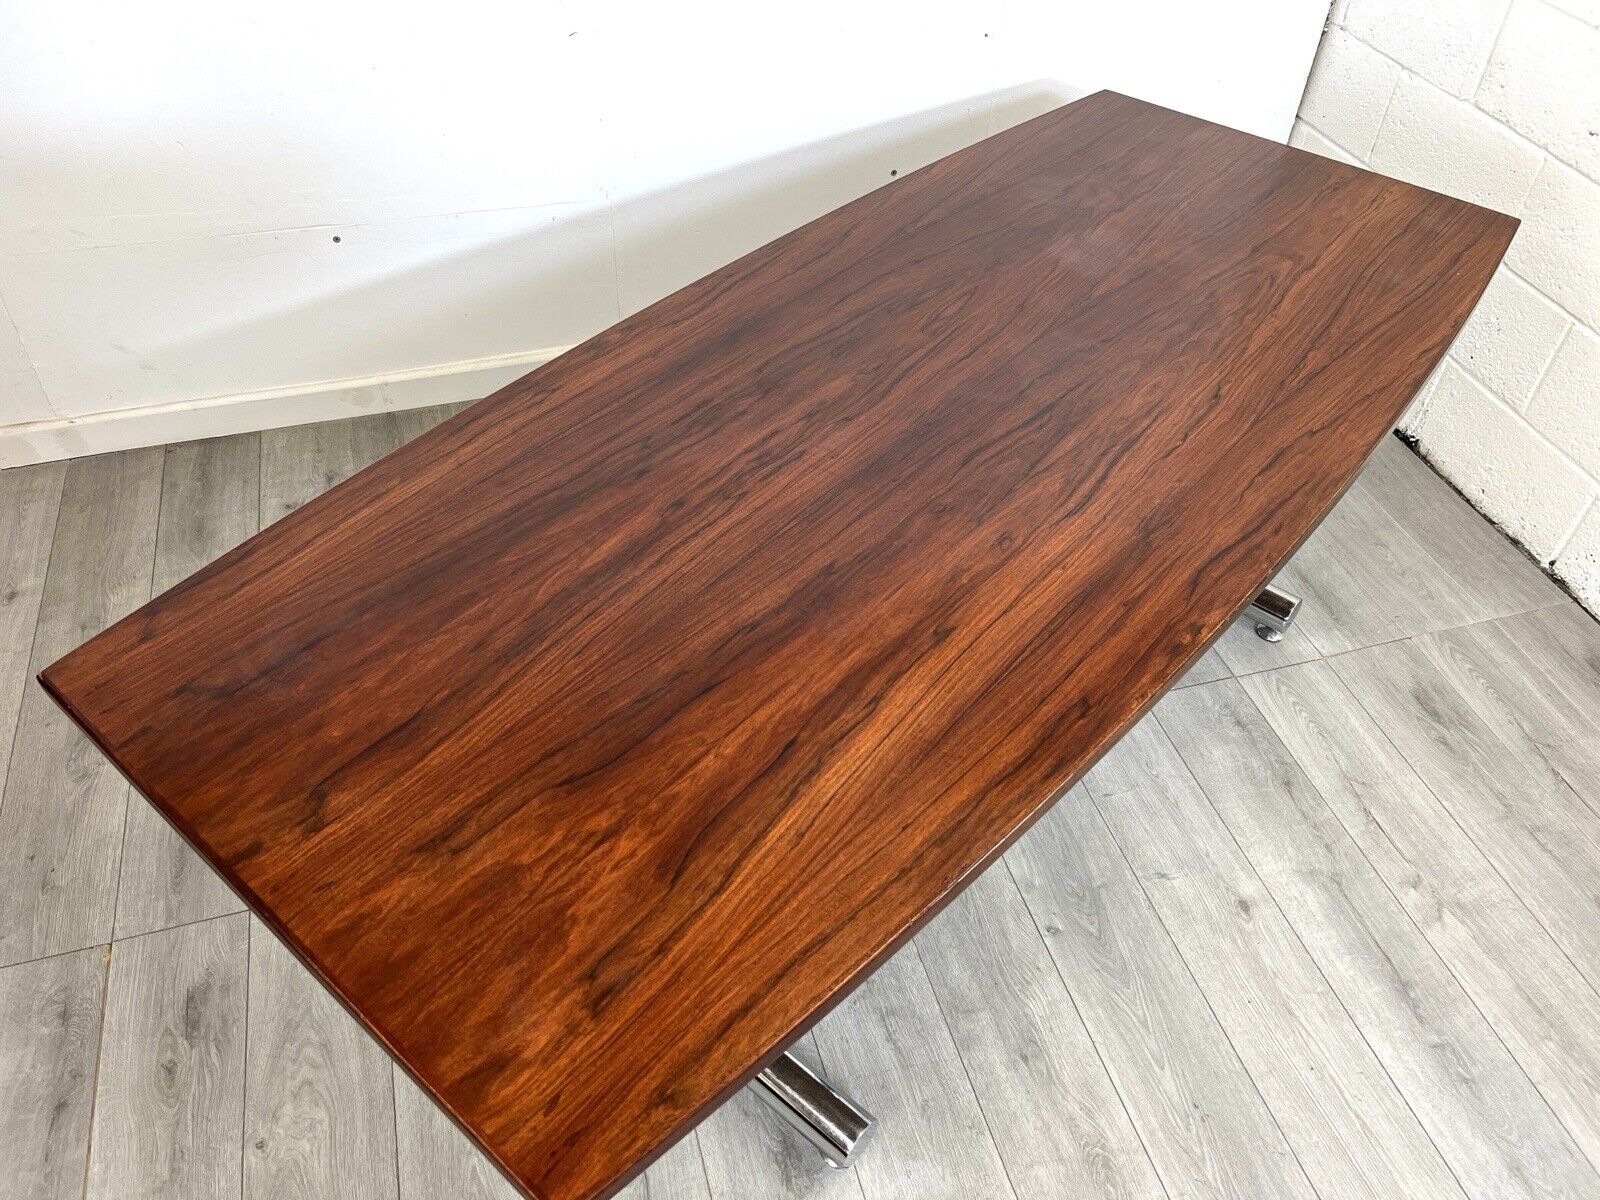 Pieff, 6 Seater Rosewood Dining Table